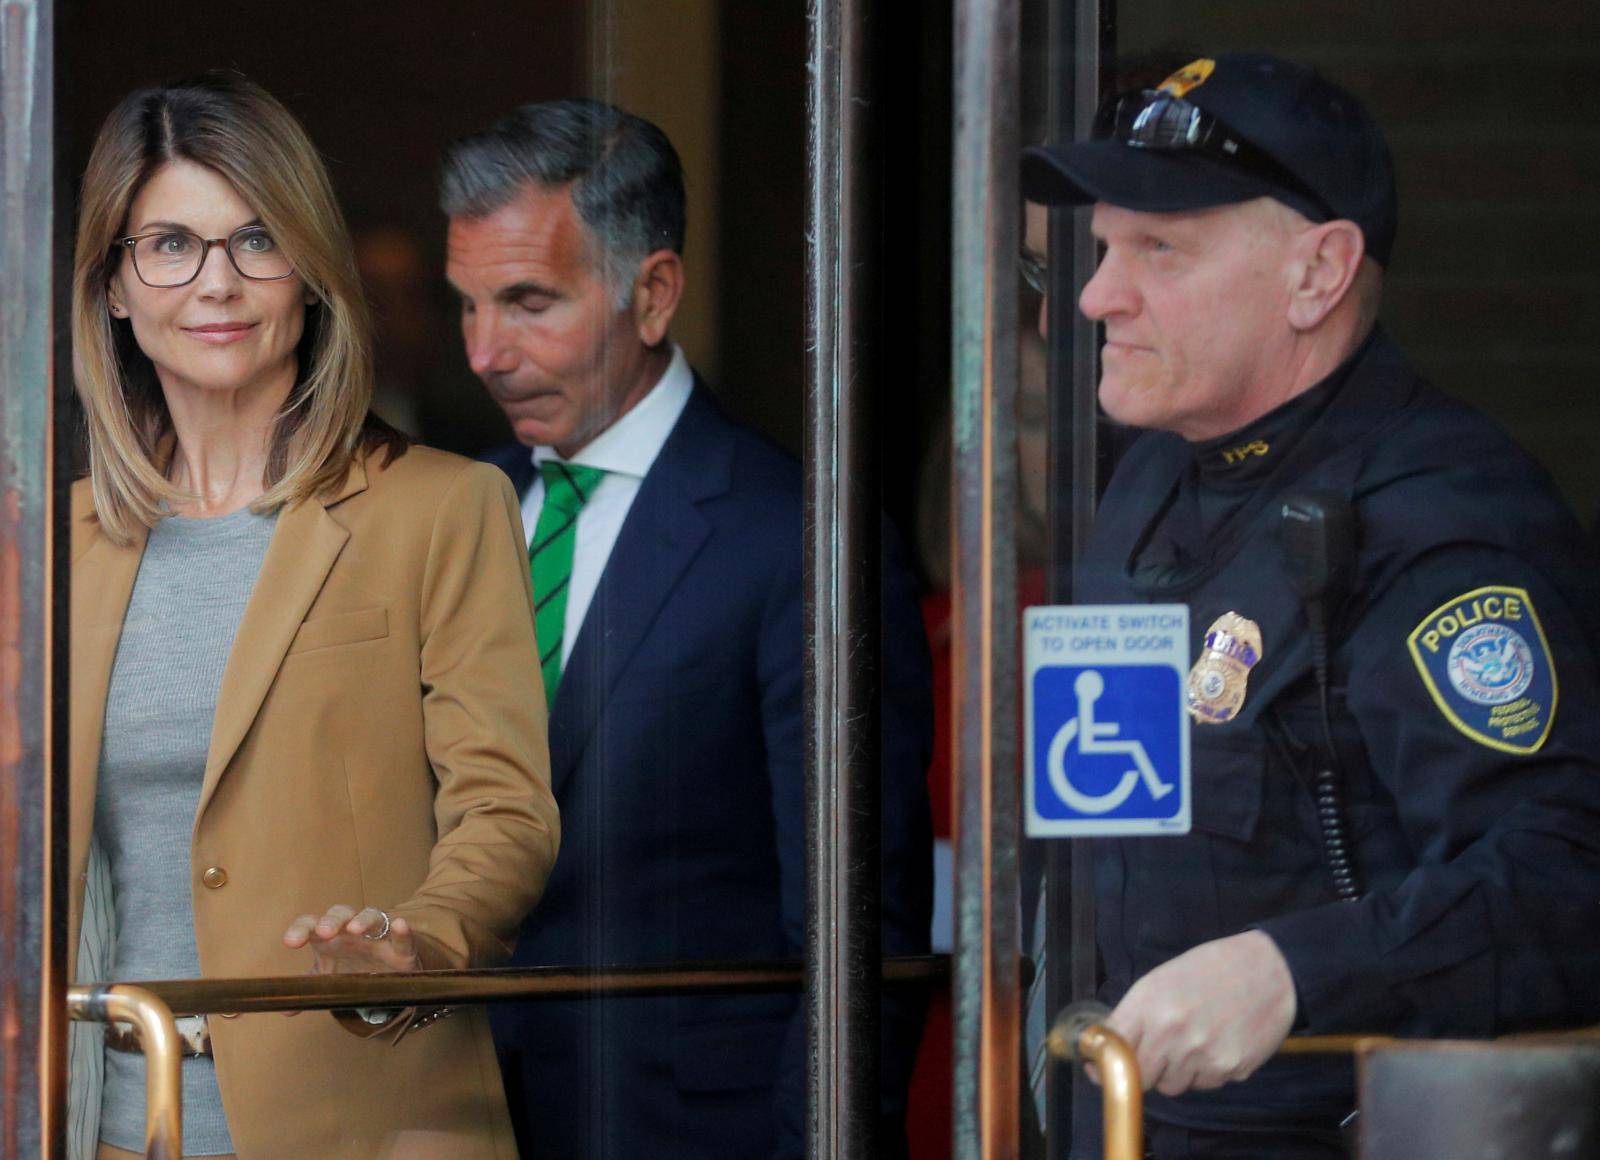 FILE PHOTO: Actor Lori Loughlin, and husband, fashion designer Mossimo Giannulli, facing charges in a nationwide college admissions cheating scheme, leave federal court in Boston